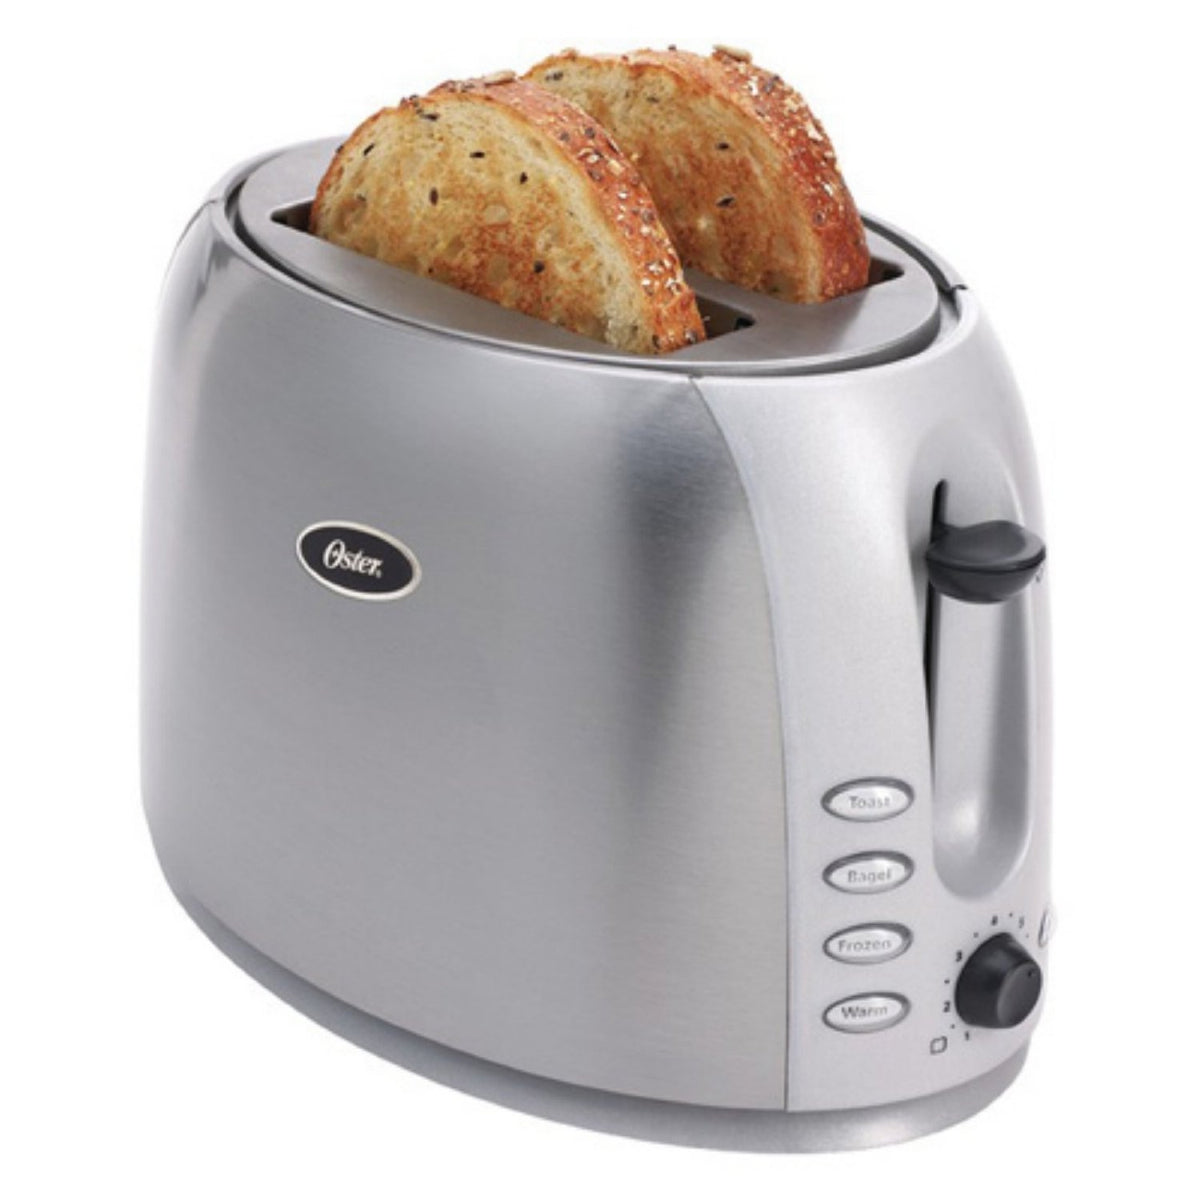 Buy oster 6594 2-slice - Online store for small appliances, toasters in USA, on sale, low price, discount deals, coupon code